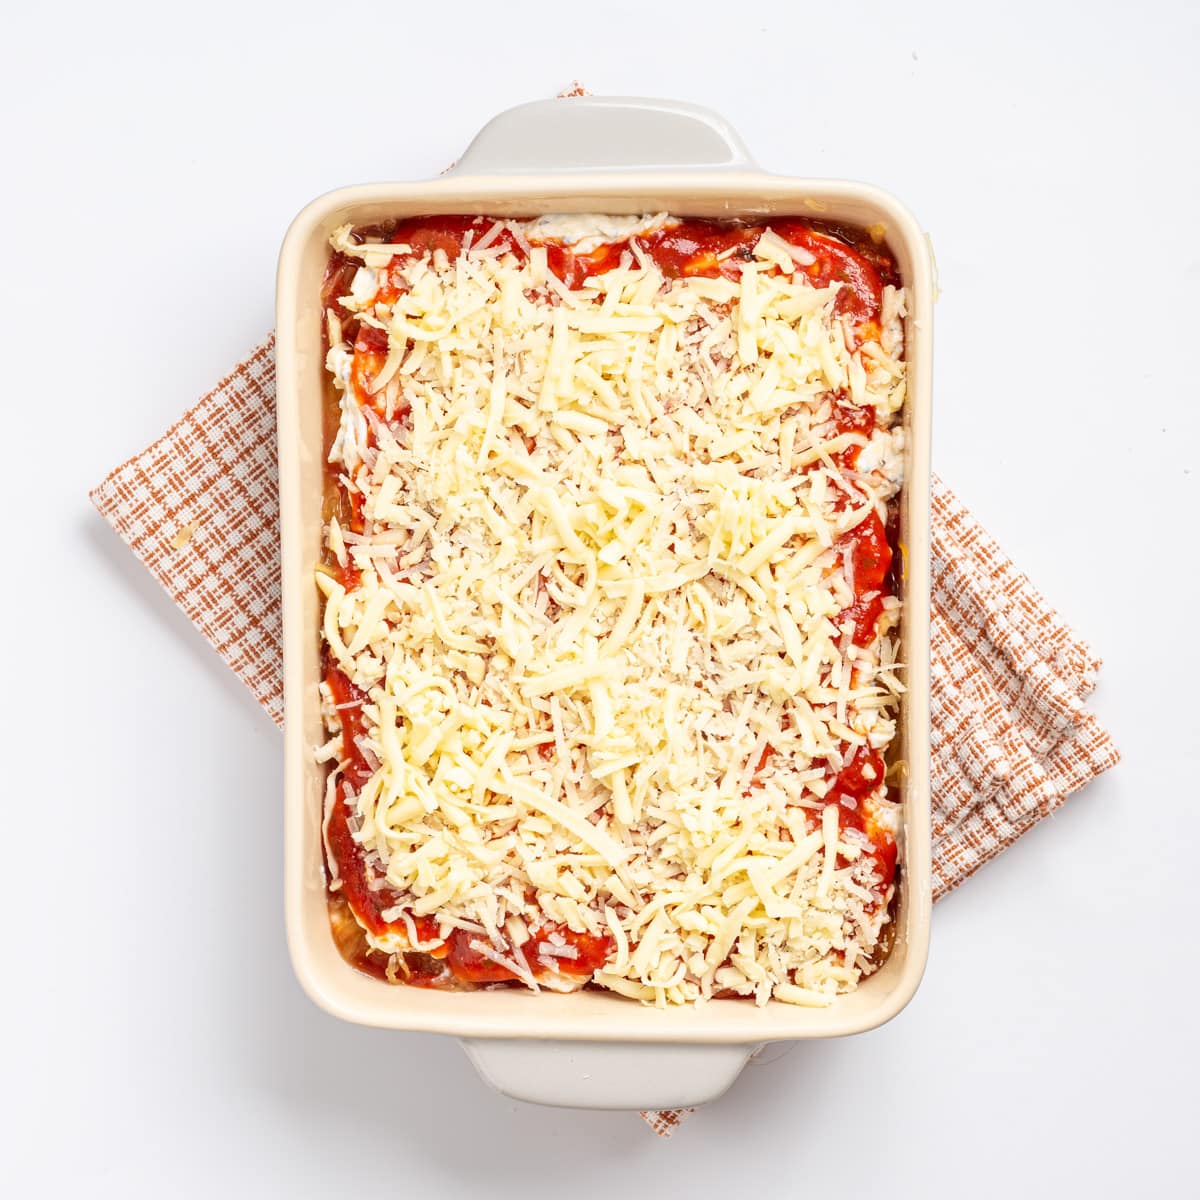 An overhead image of mozzarella and Parmesan cheese sprinkled evenly as a top layer of the lasagna.